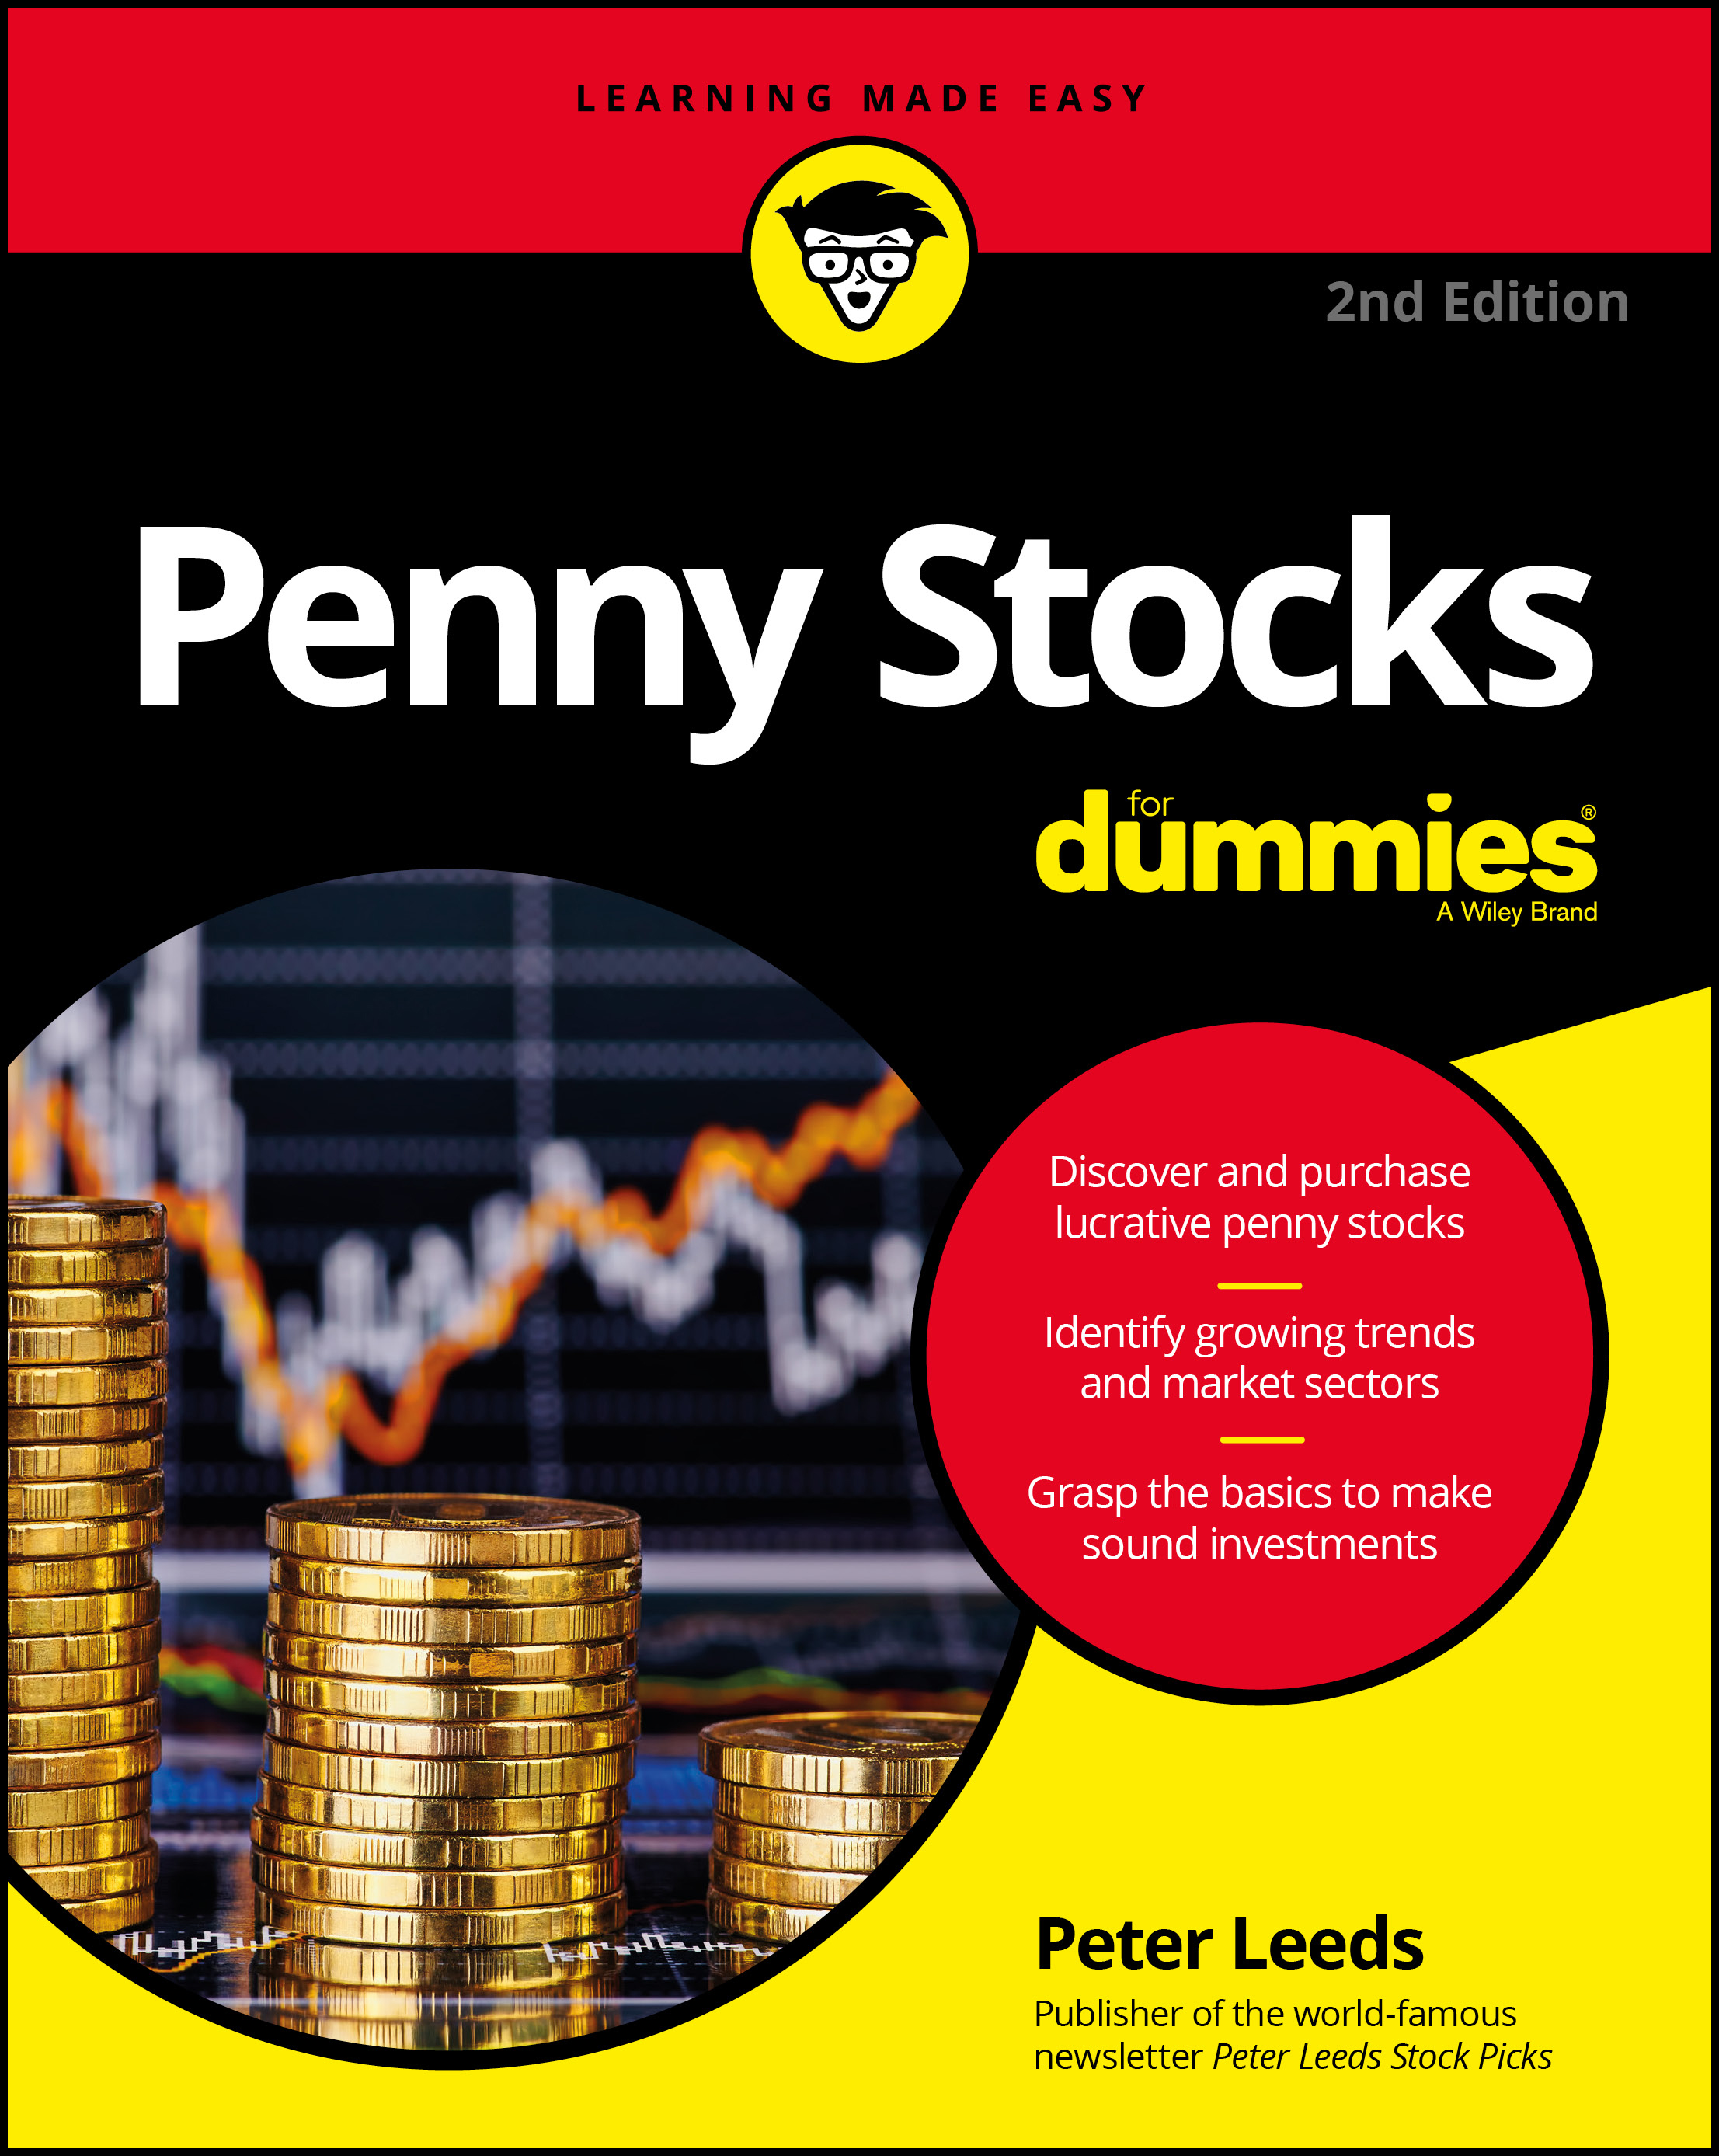 Penny Stocks for Dummies, Other Books by Peter Leeds